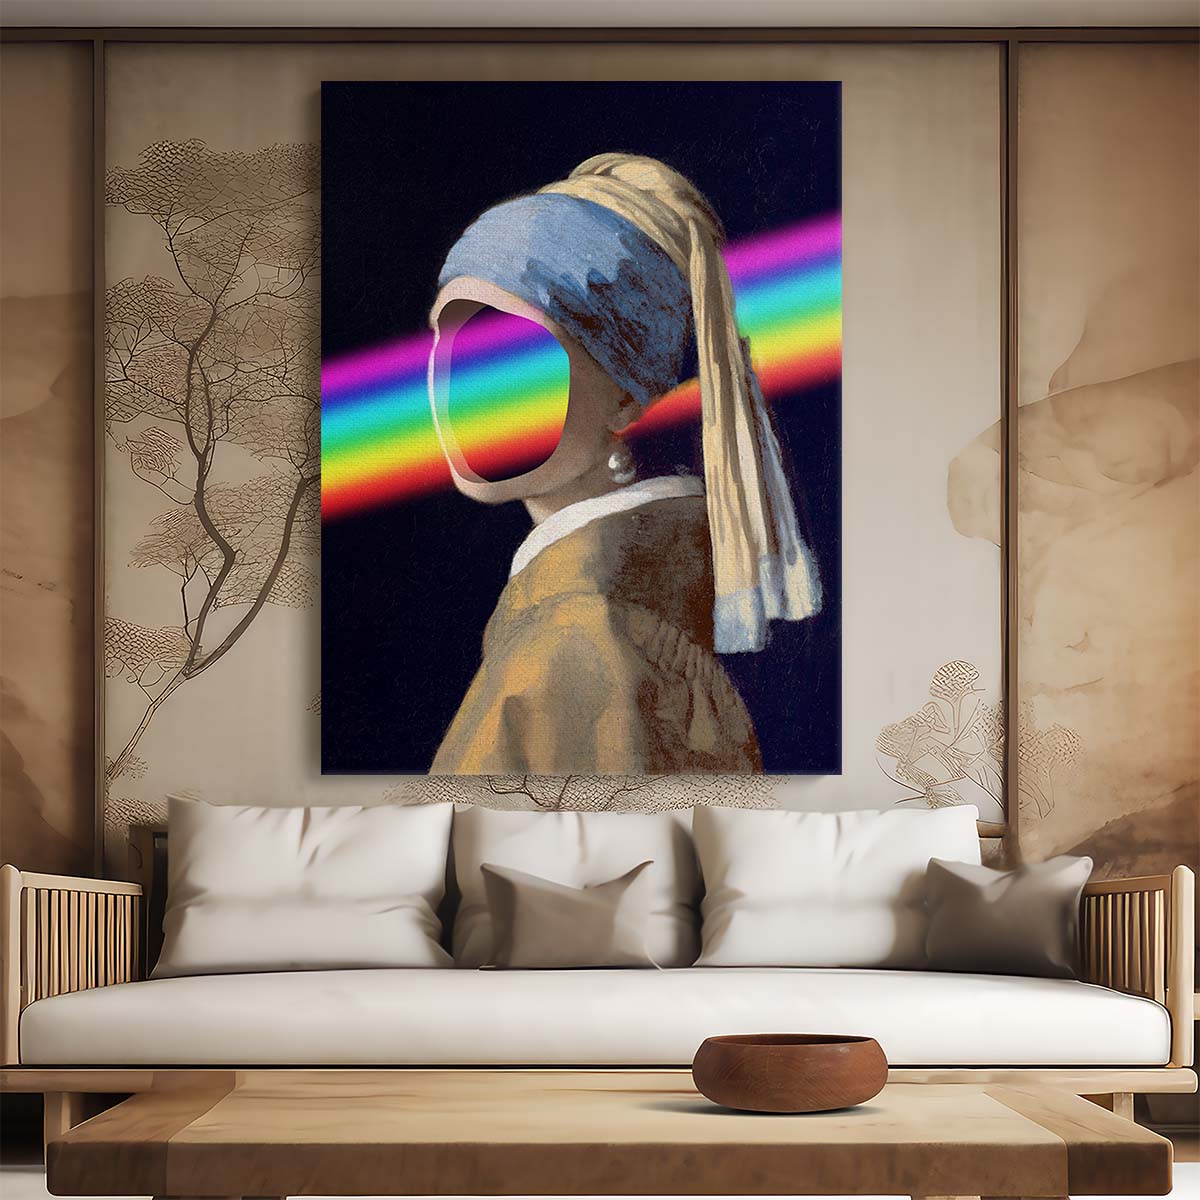 Vermeer's Girl with Pearl Earring Illustration Digital Rainbow Portrait Art by Luxuriance Designs, made in USA